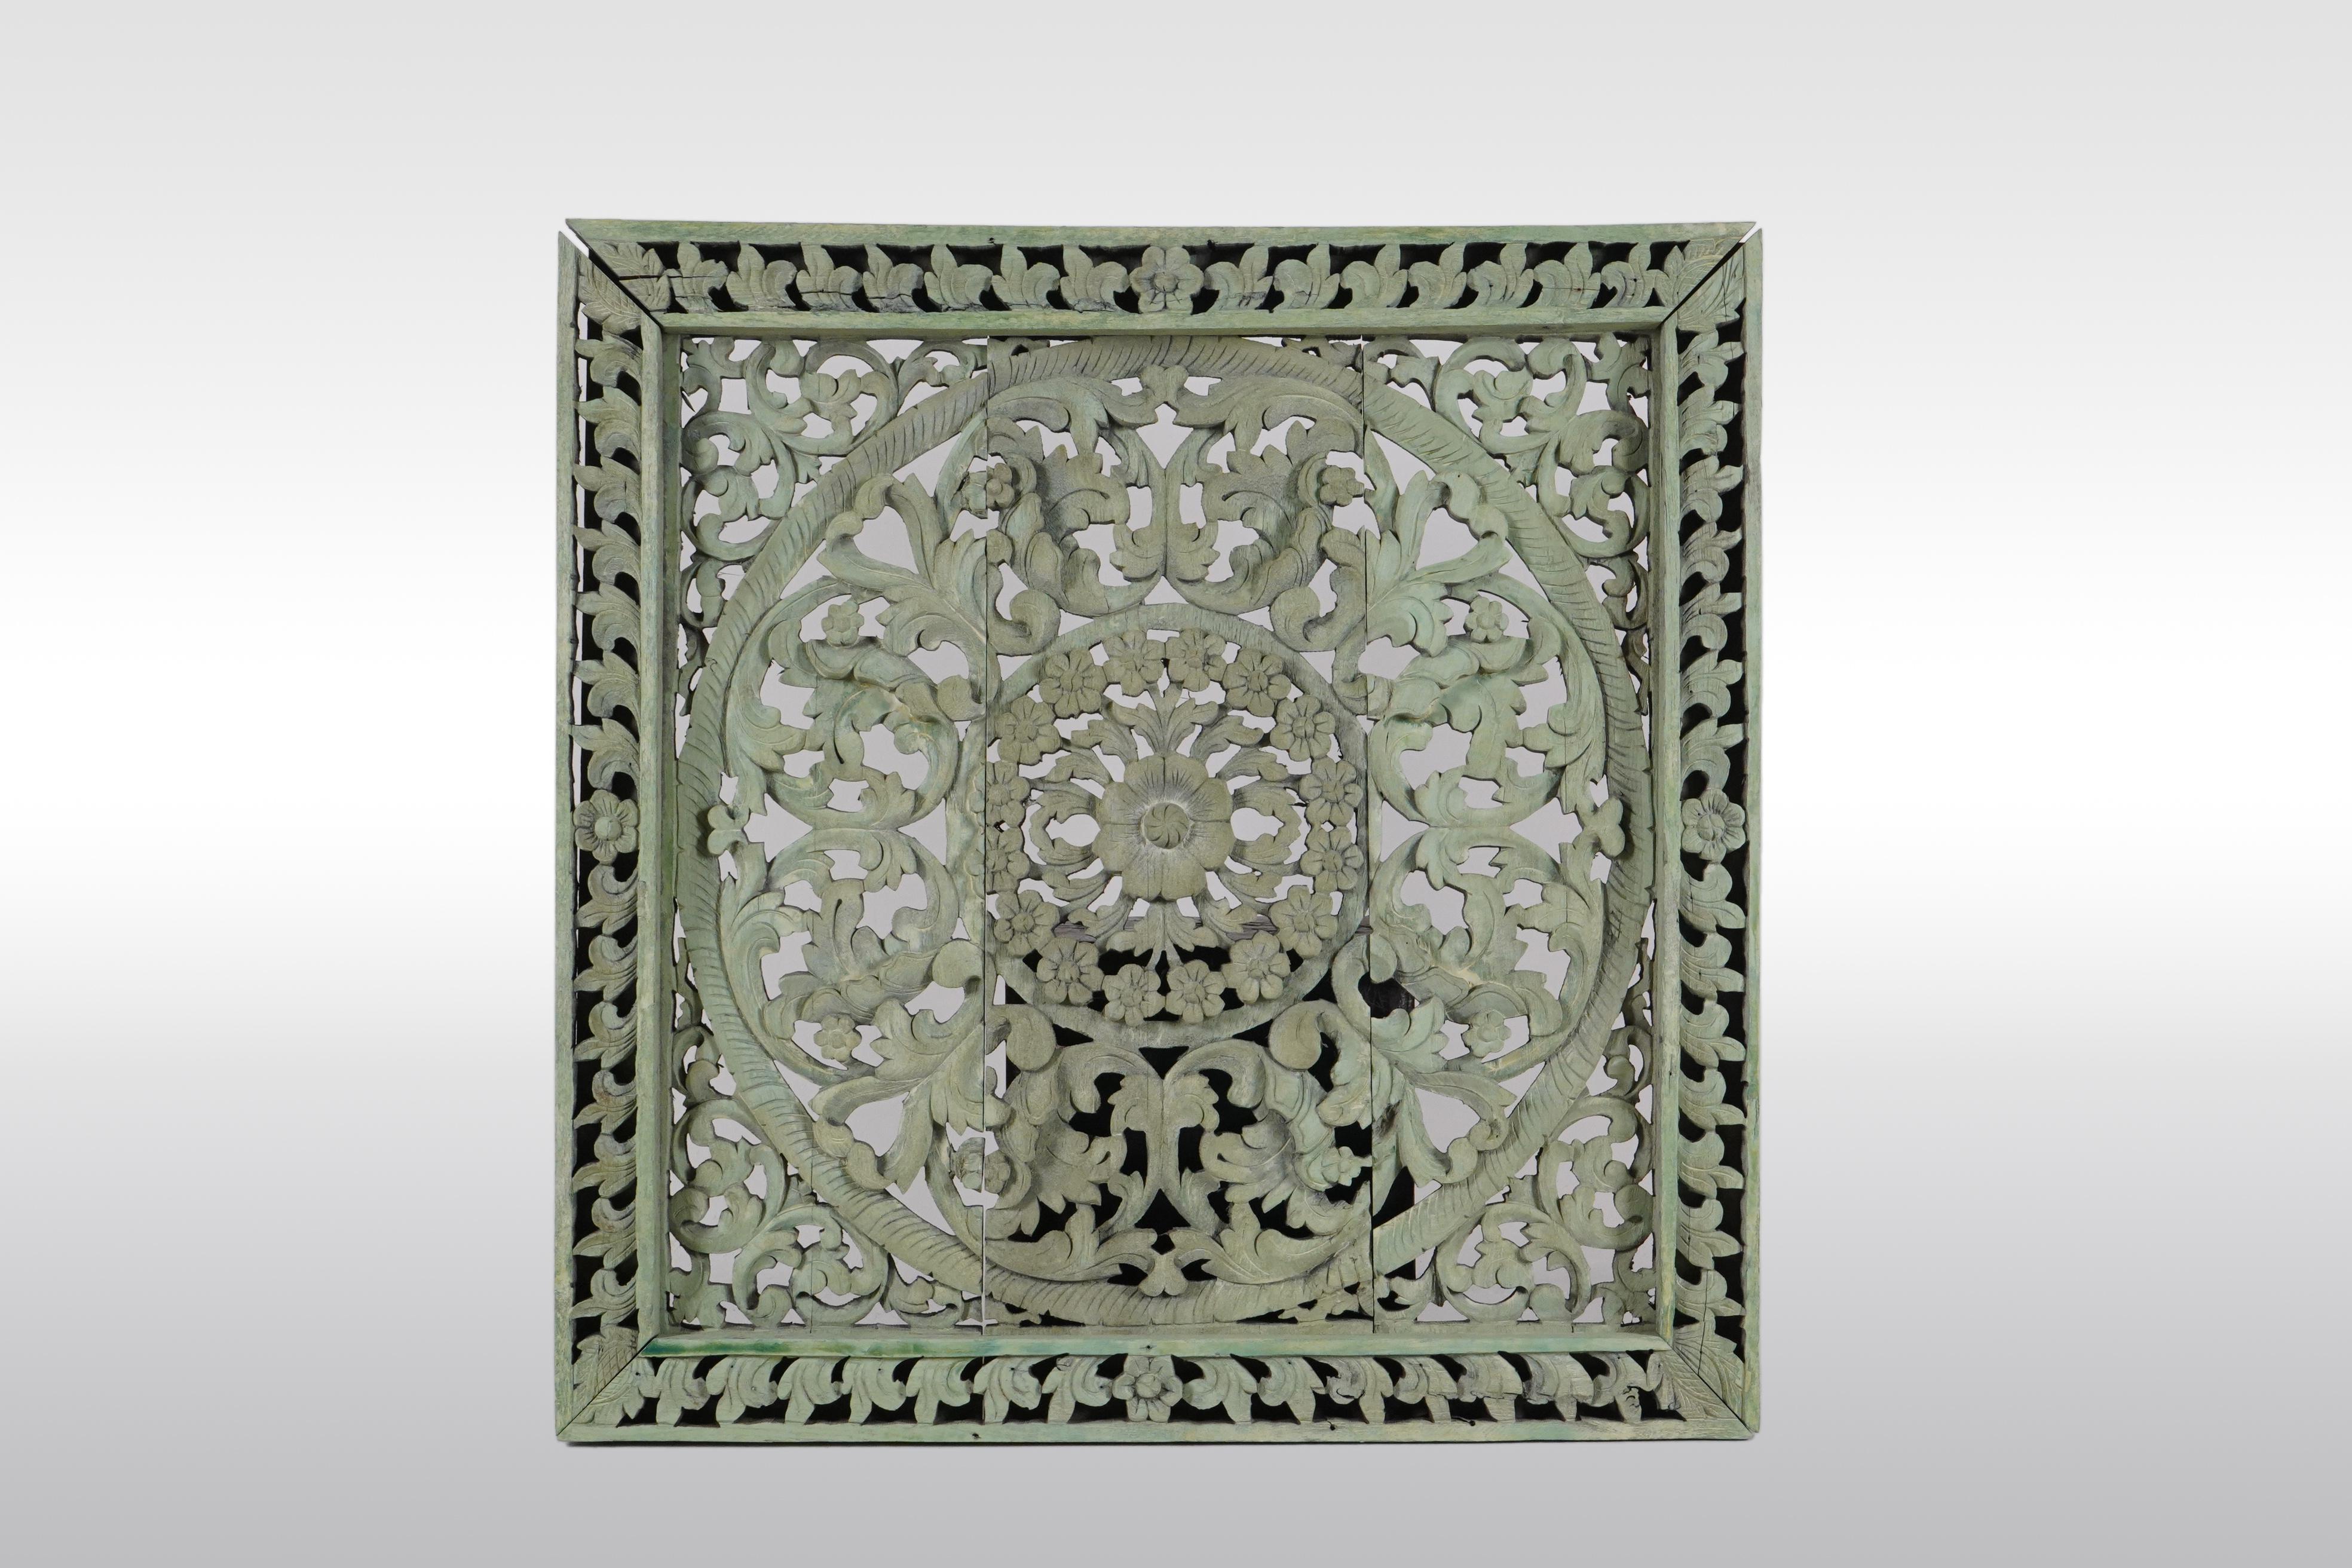 This is a meticulous recreation of an antique Thai temple ceiling panel. Northern Thai temples often had intricately carved wooden ceilings made up of coffered panels with carved and gilded lotus flowers in their centers. The overall effect was of a